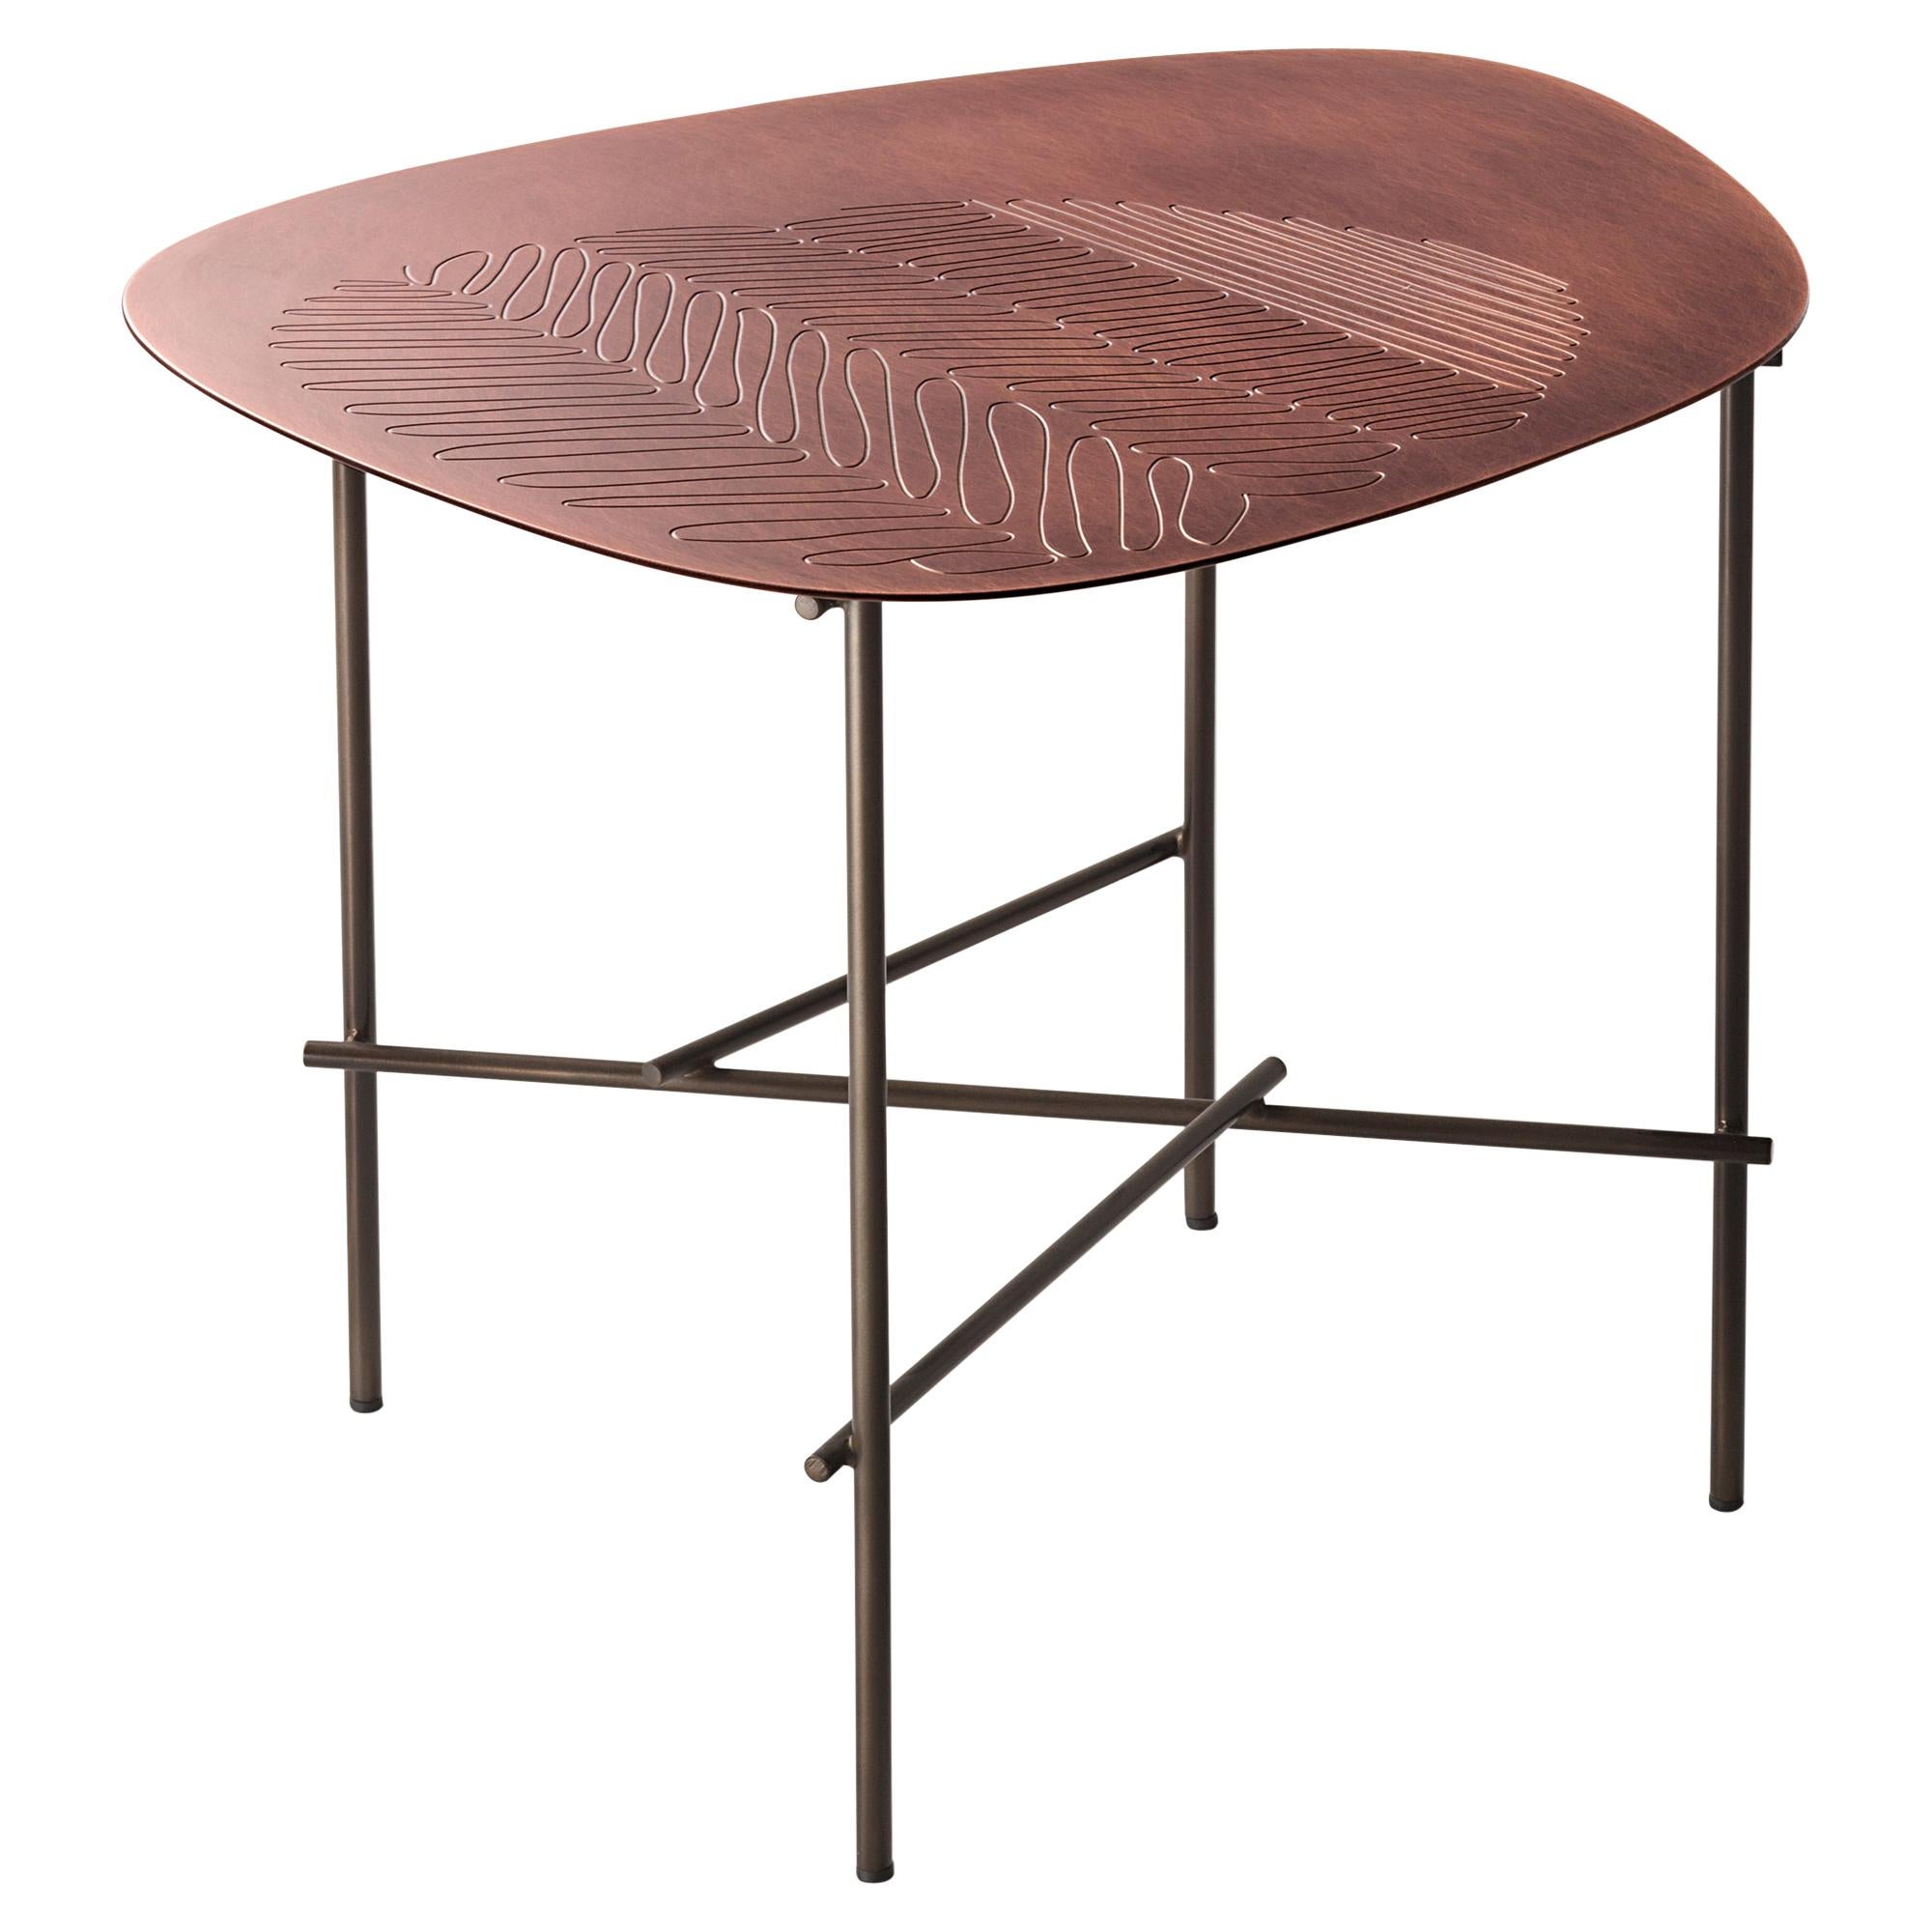 DeCastelli Syro 45 Coffee Table in Copper Top with Iron Base by Emilio Nanni For Sale